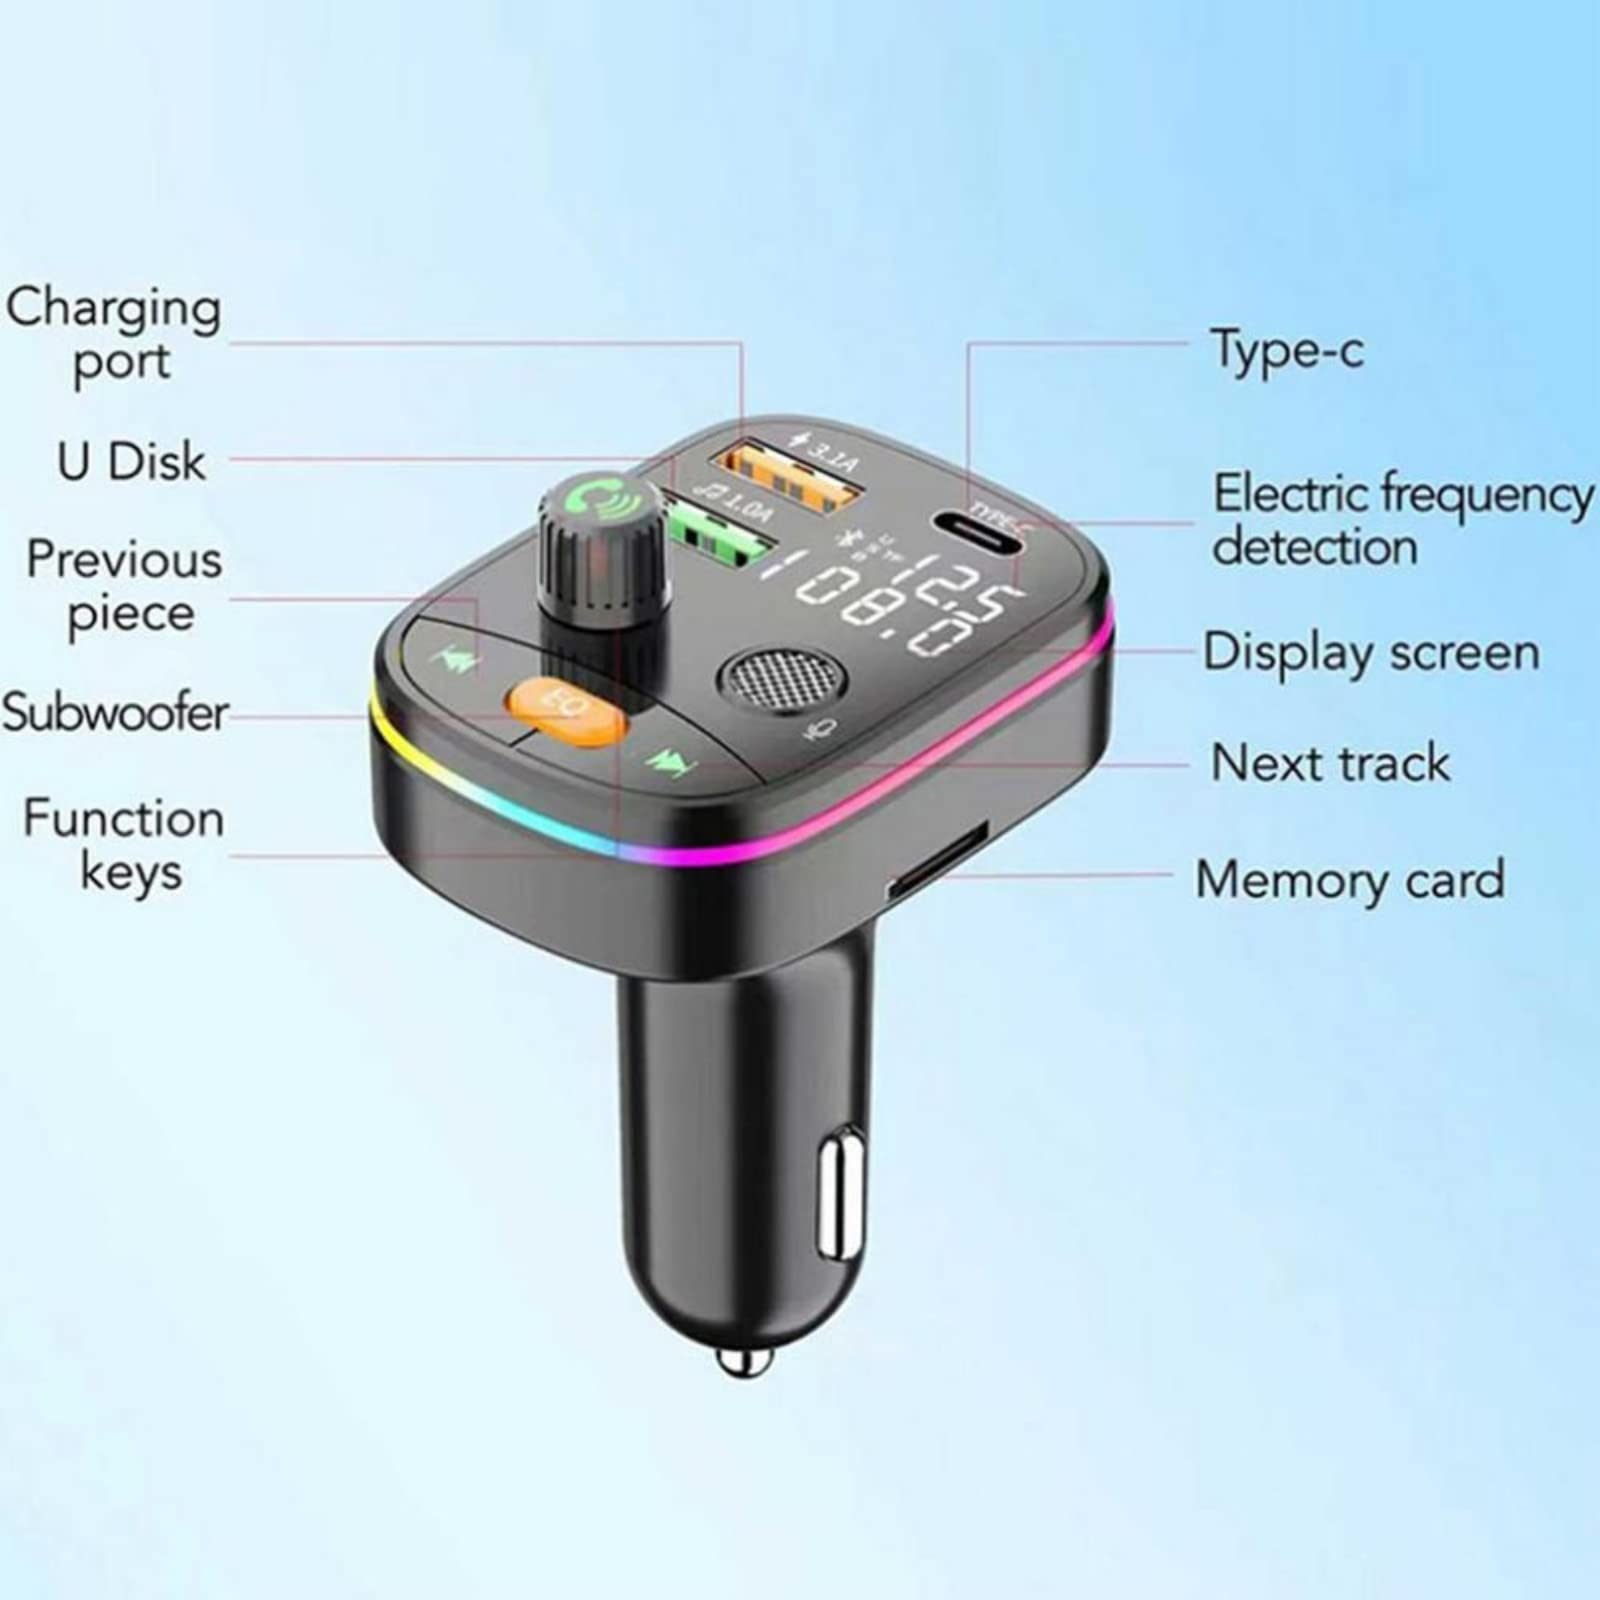 Bluetooth 5.0 FM Transmitter for Car - Cigarette Lighter Aux Port Car Wireless MP3 Adapter with Microphone HiFi Bass Sound Music Adaptor Radio Transmitter & USB PD Fast Charging Port car Accesories